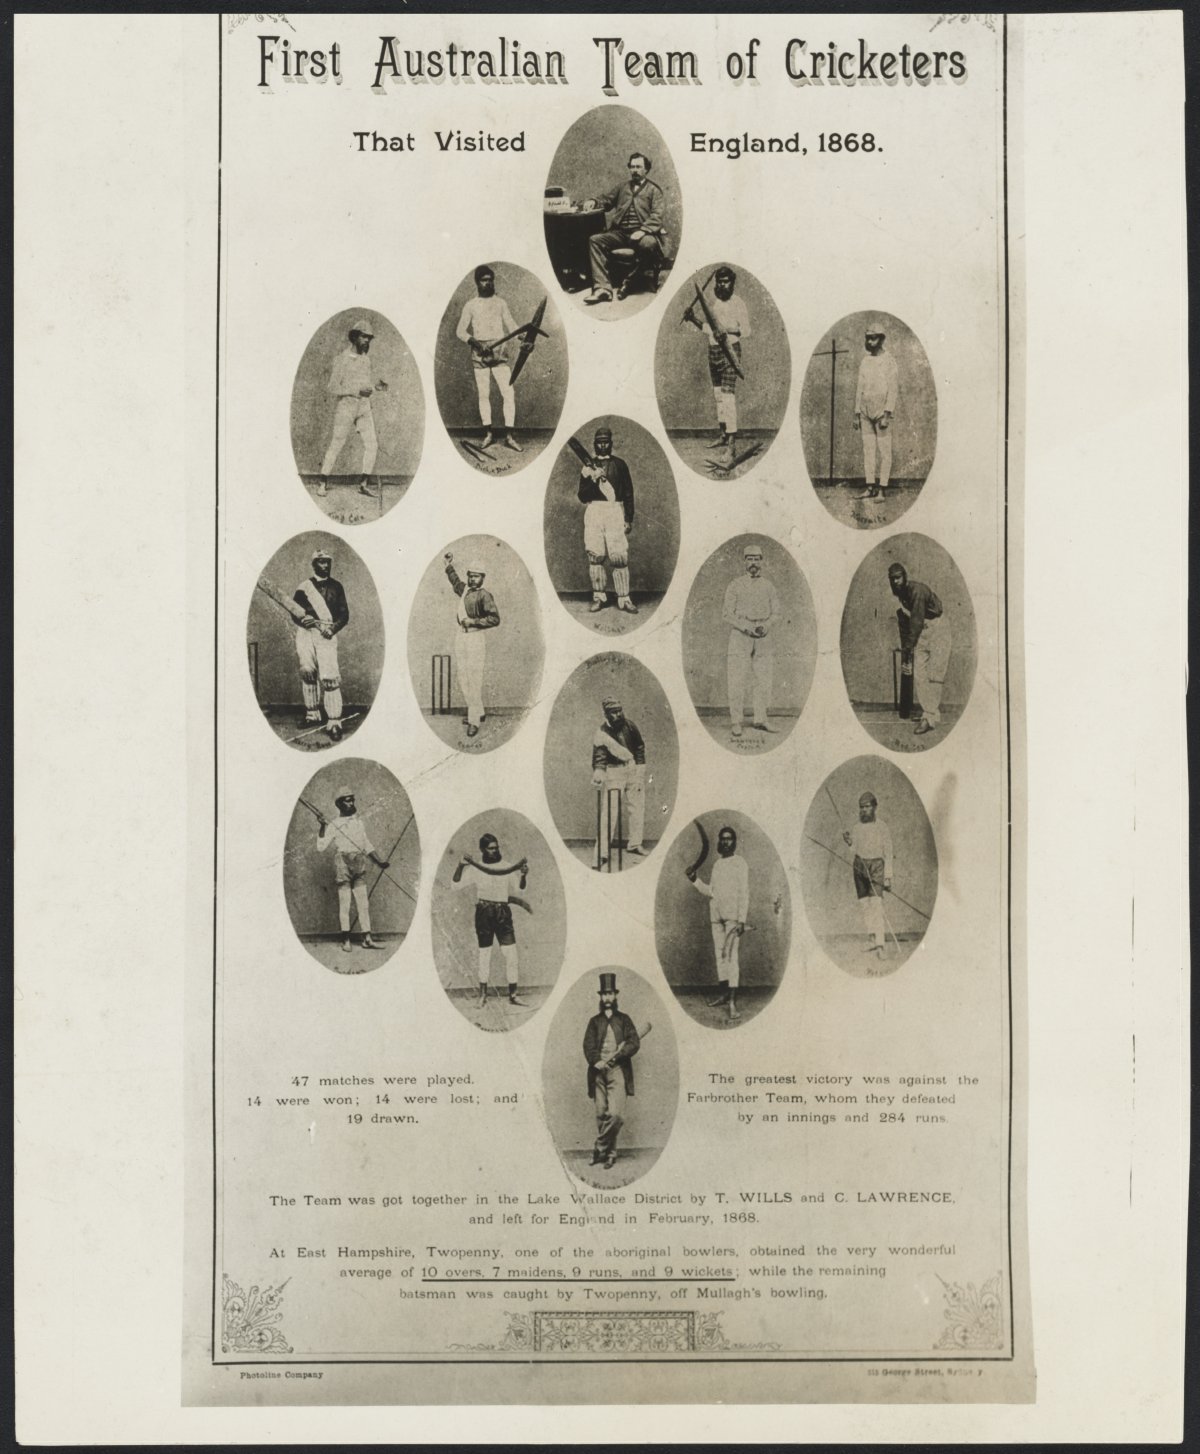 Black and white image of a poster titled 'First Australian Team of Cricketers that visited England, 1868'